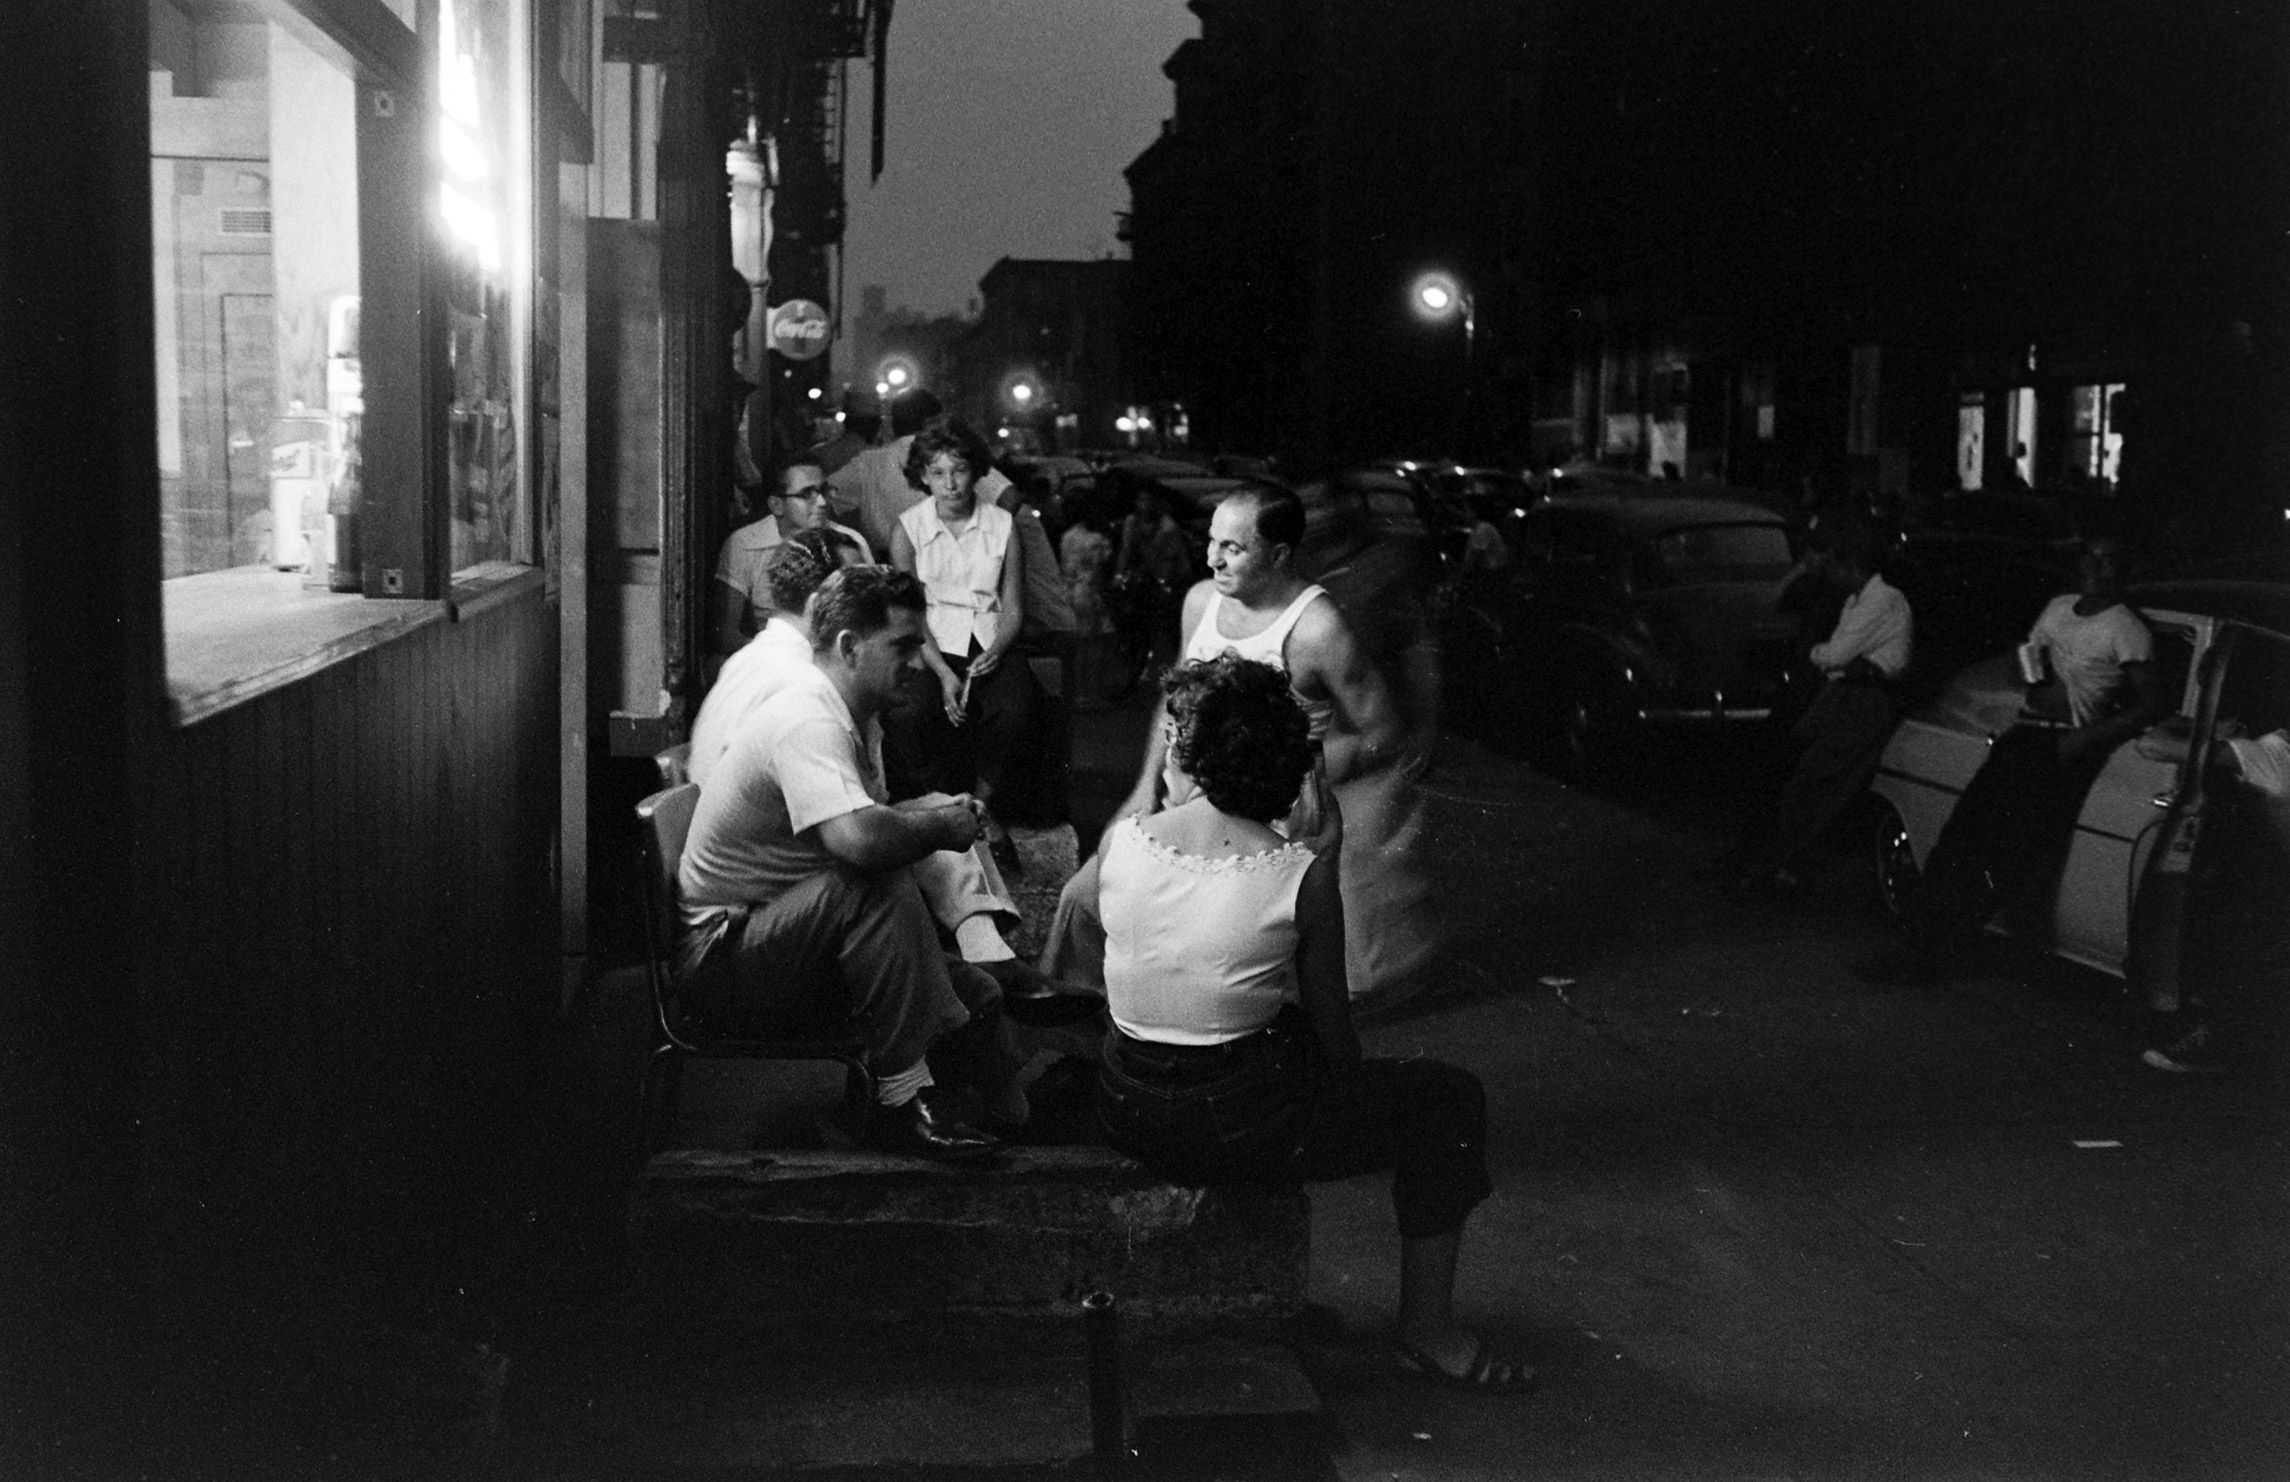 People spending time outdoors during an ongoing heatwave during the summer of 1953 in New York City.